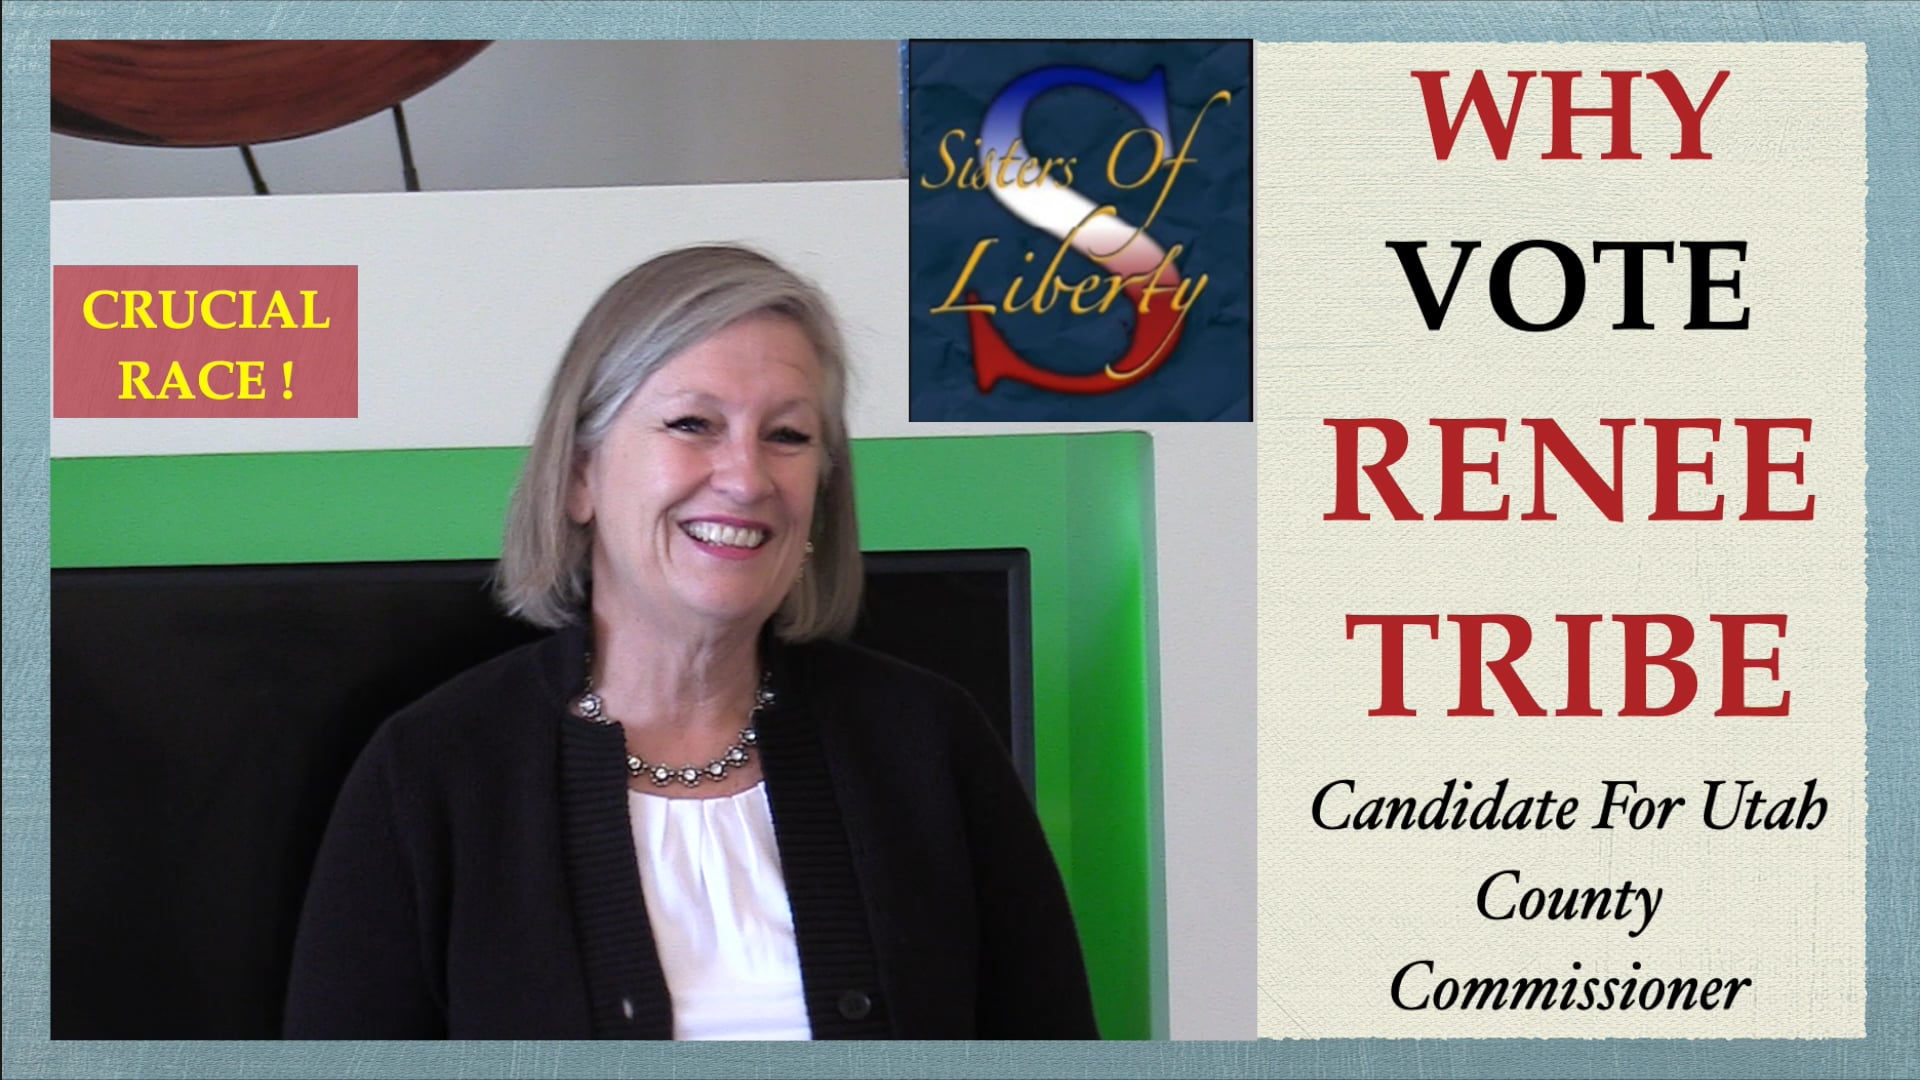 VOTE for Renee Tribe - Utah County Commissioner - Sisters of Liberty